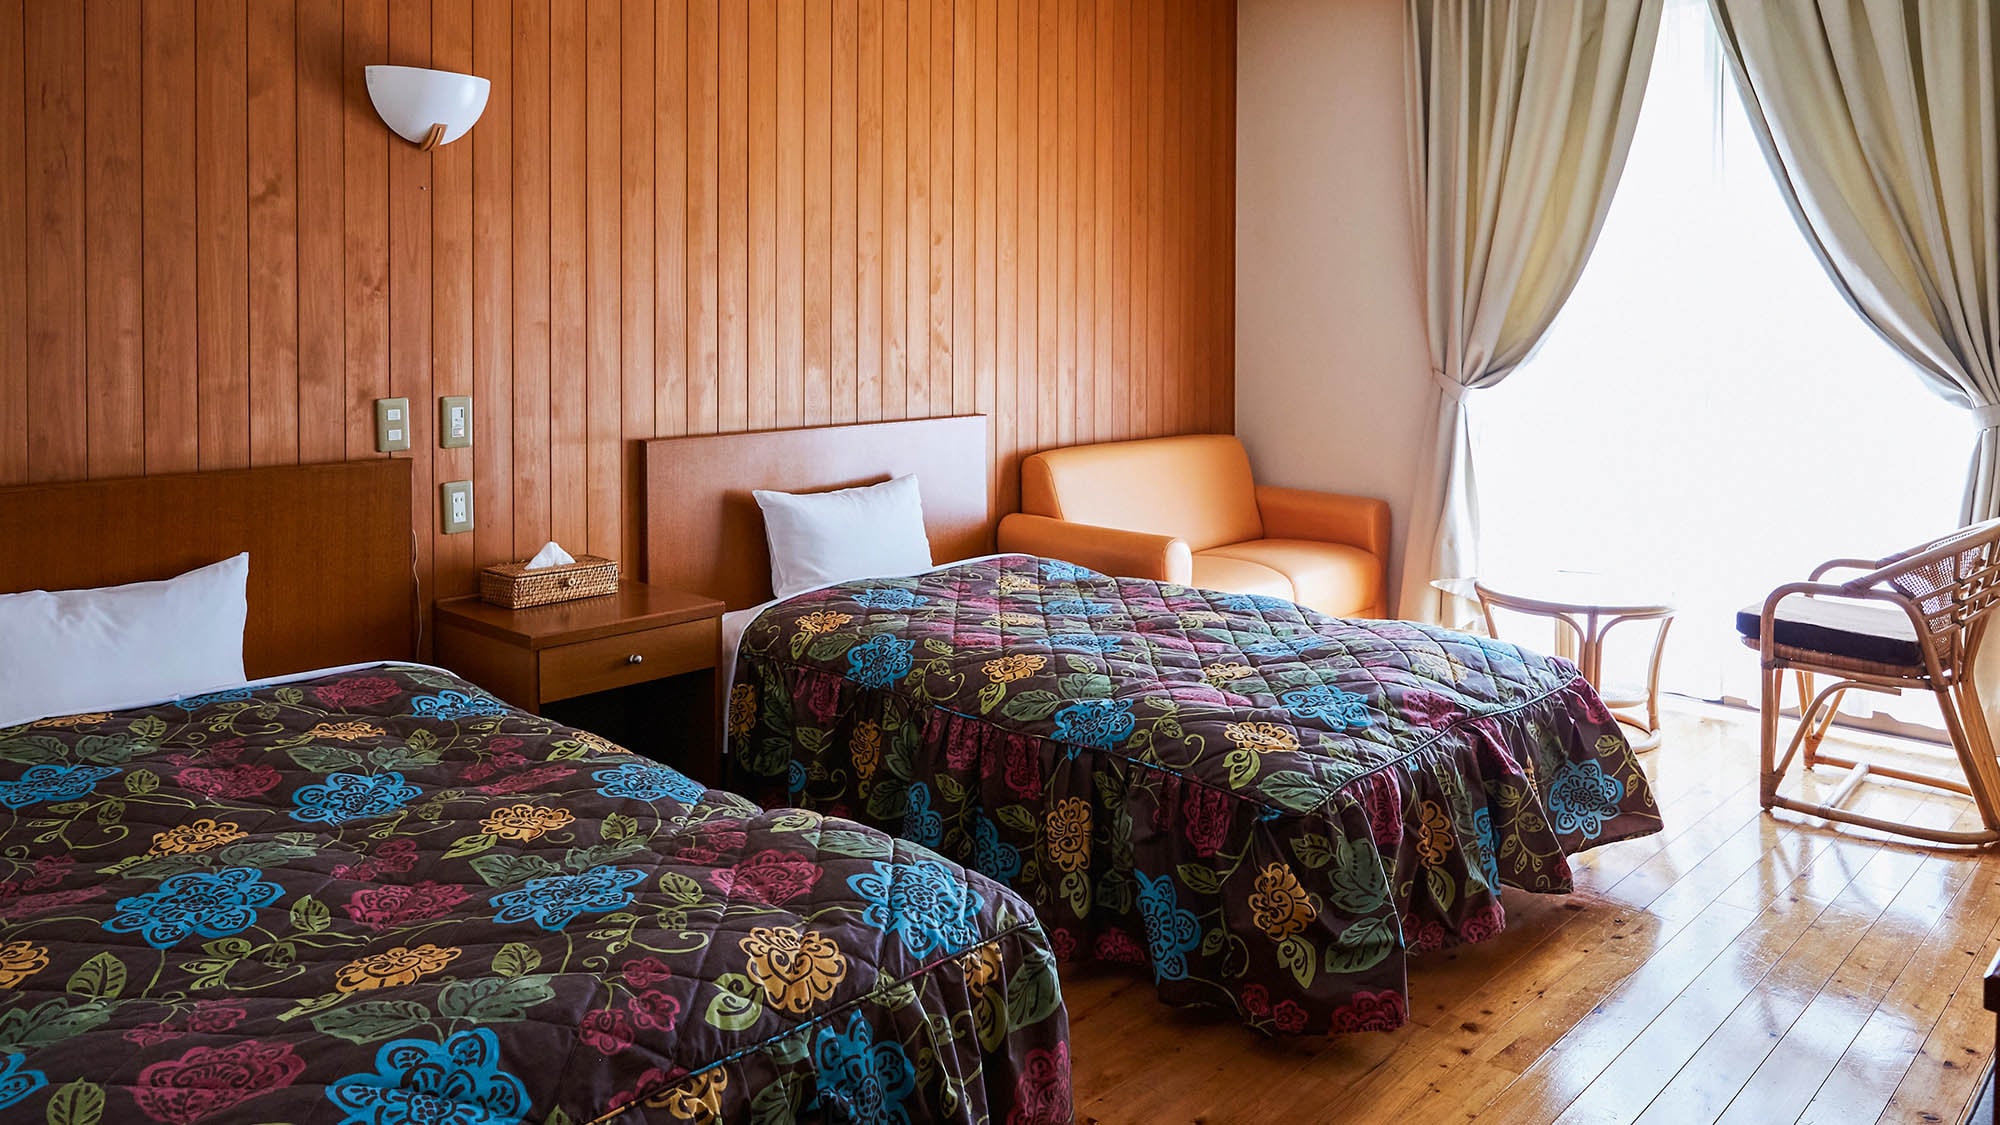 ・ [New building Western-style room] 20.7 square meters. Western-style room with 2 single beds